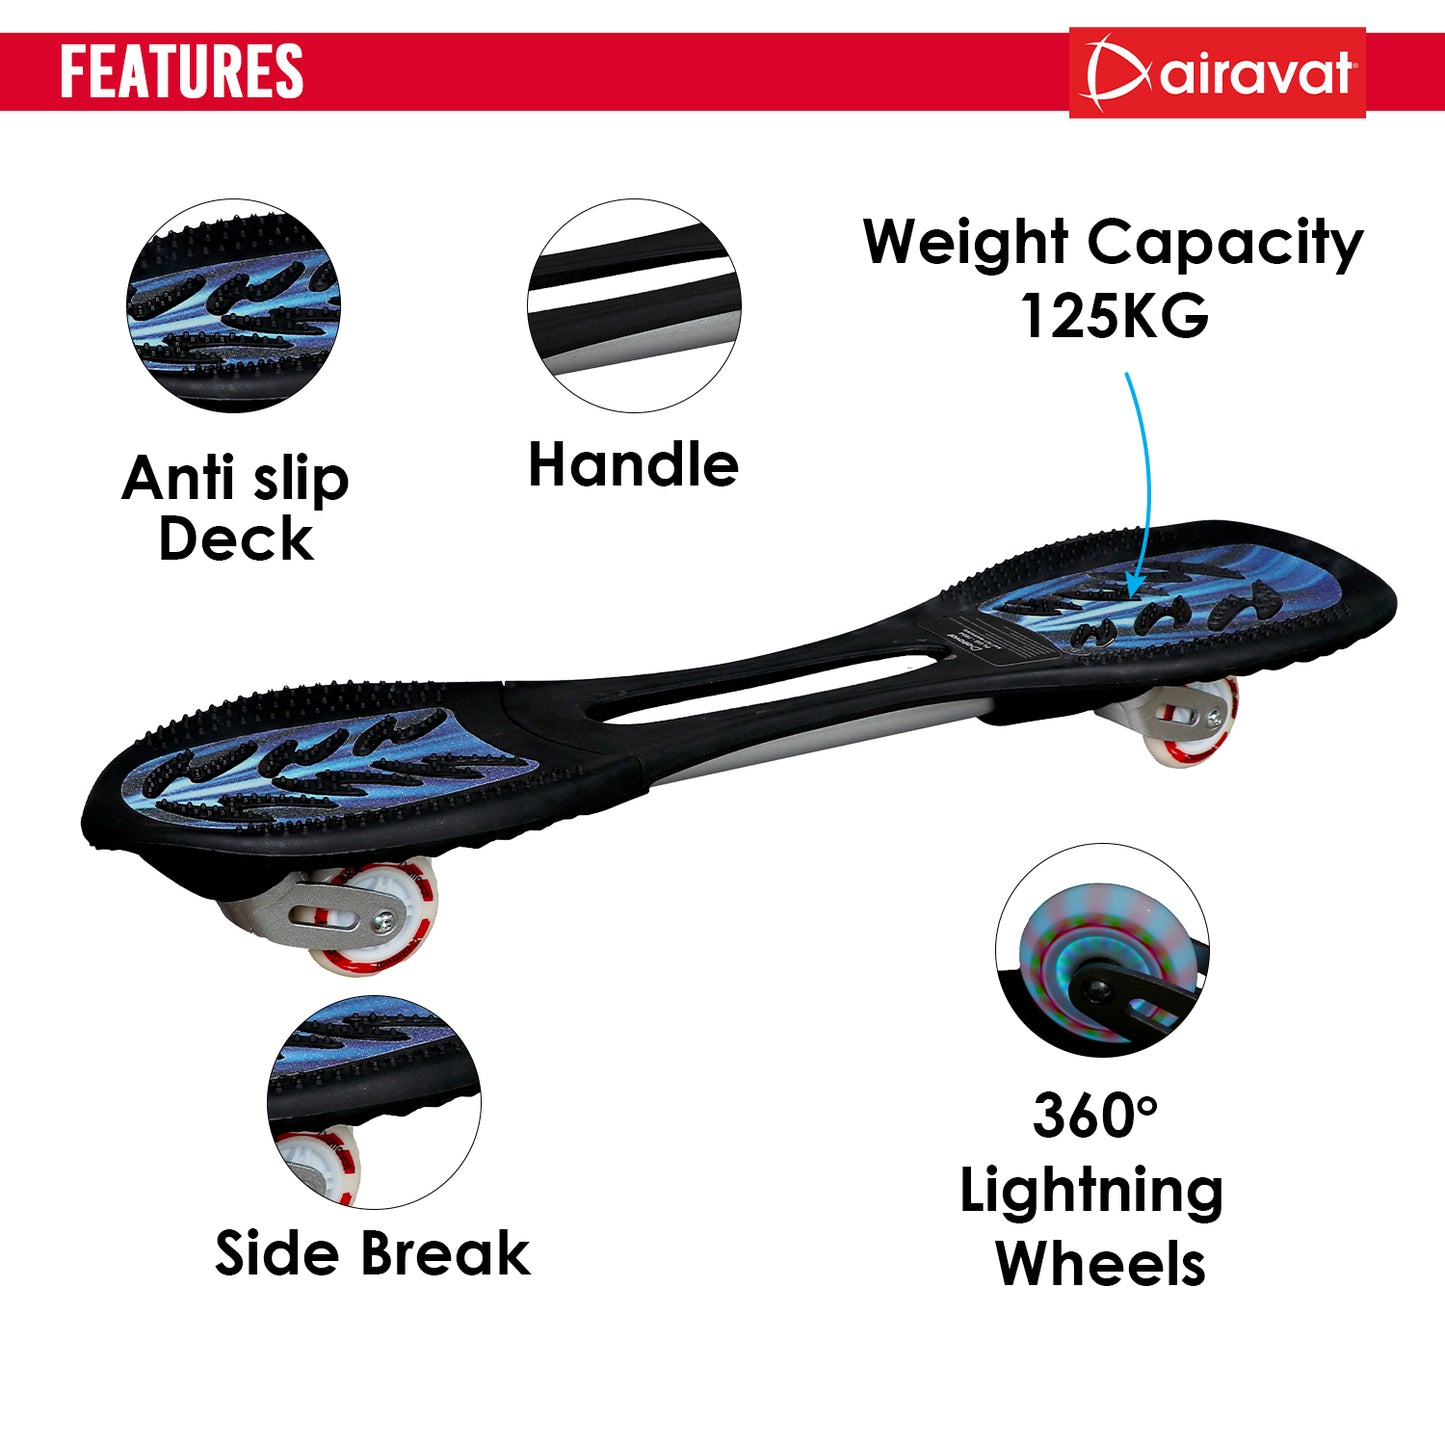 7804-waveboard-features-blue